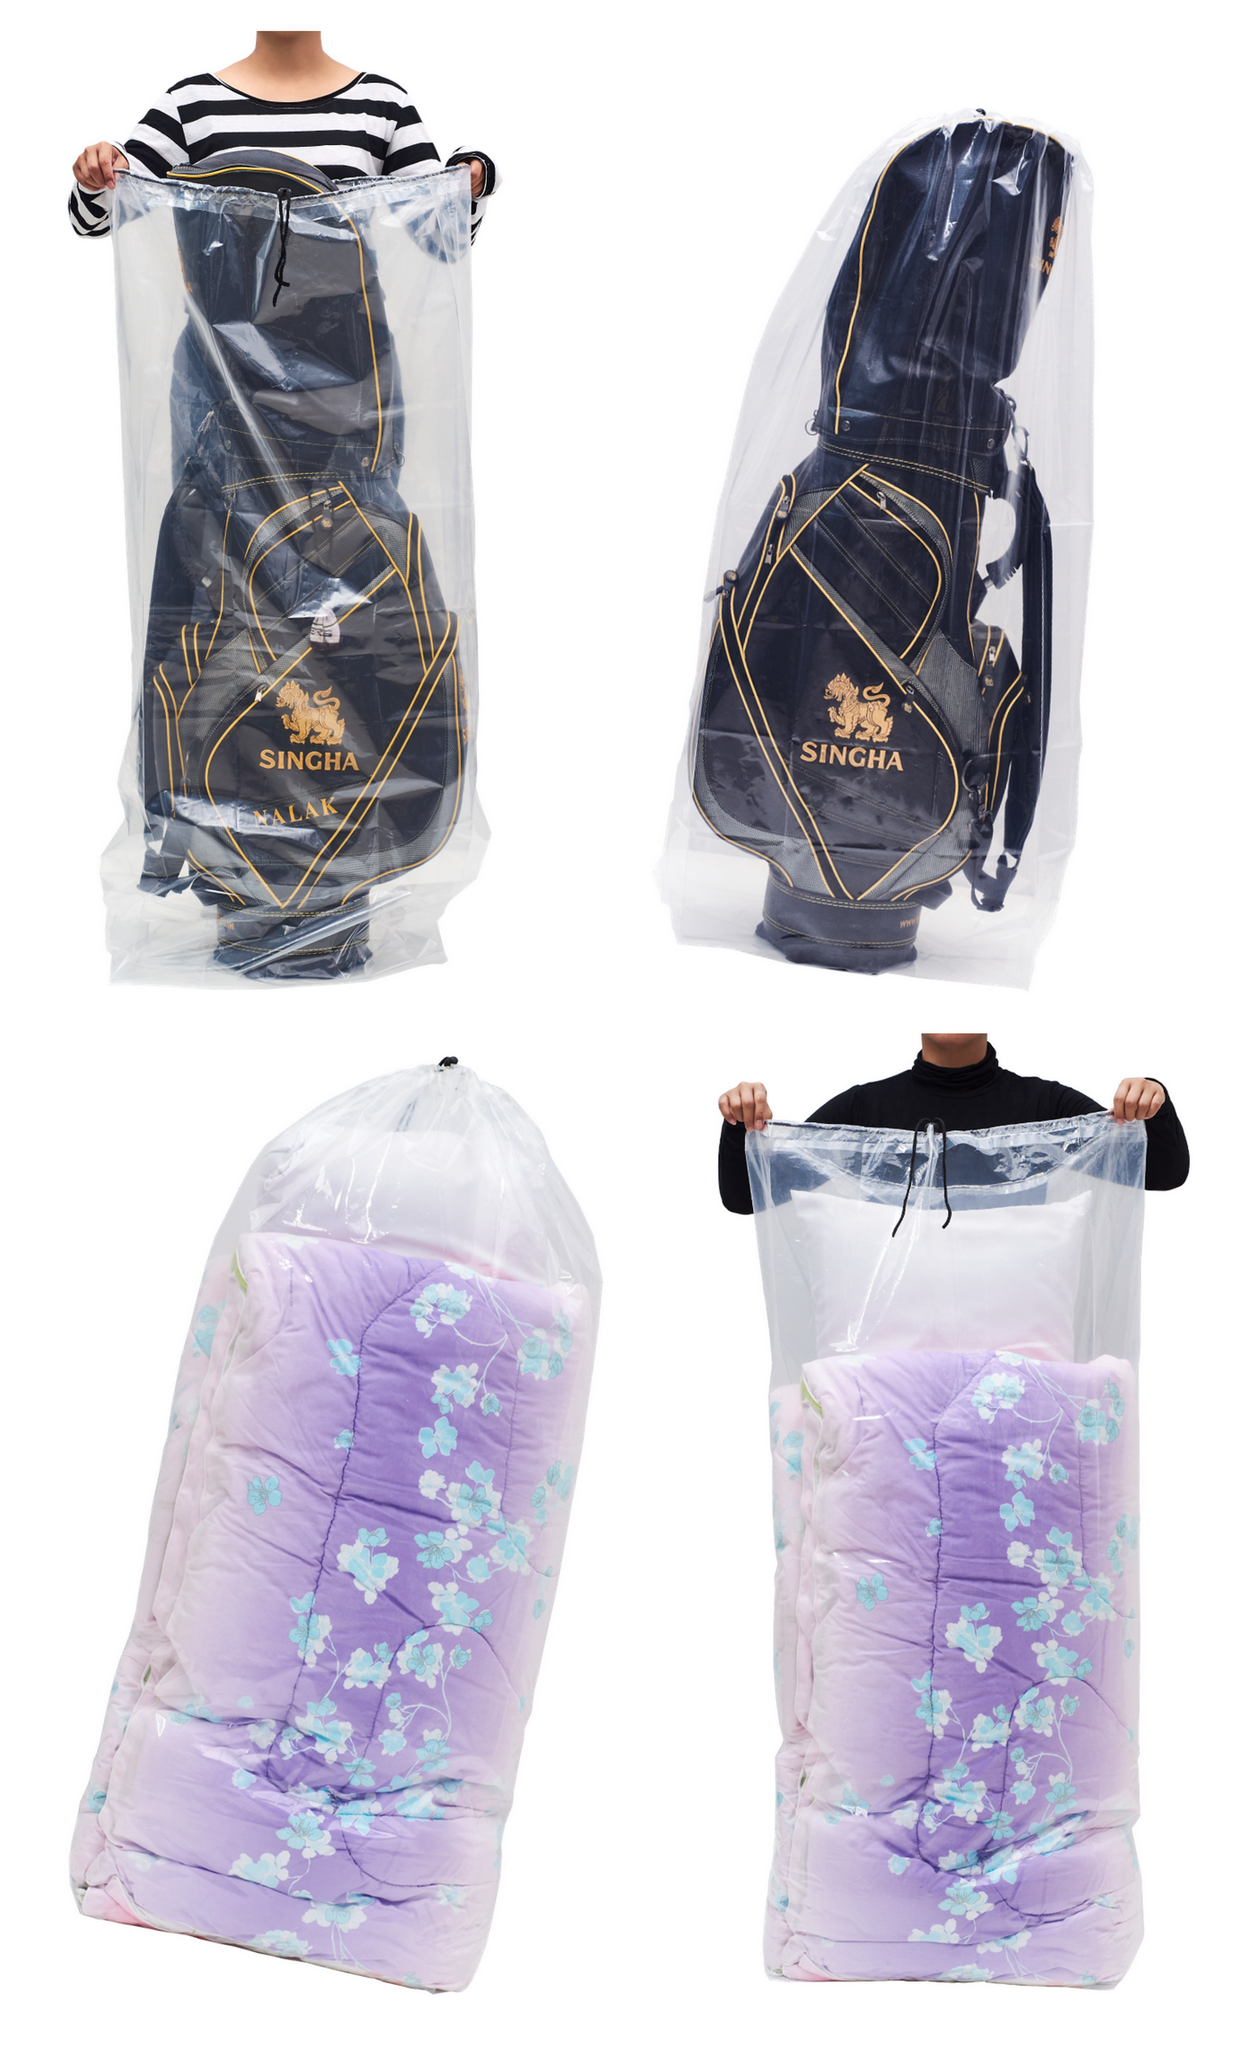 2 PCs/pack Drawstring Plastic Dust Cover Bags,Transparent Storage Bags with multi-purpose for Home Organization suitable for Golf Bag & Picnic Mattress and reusable